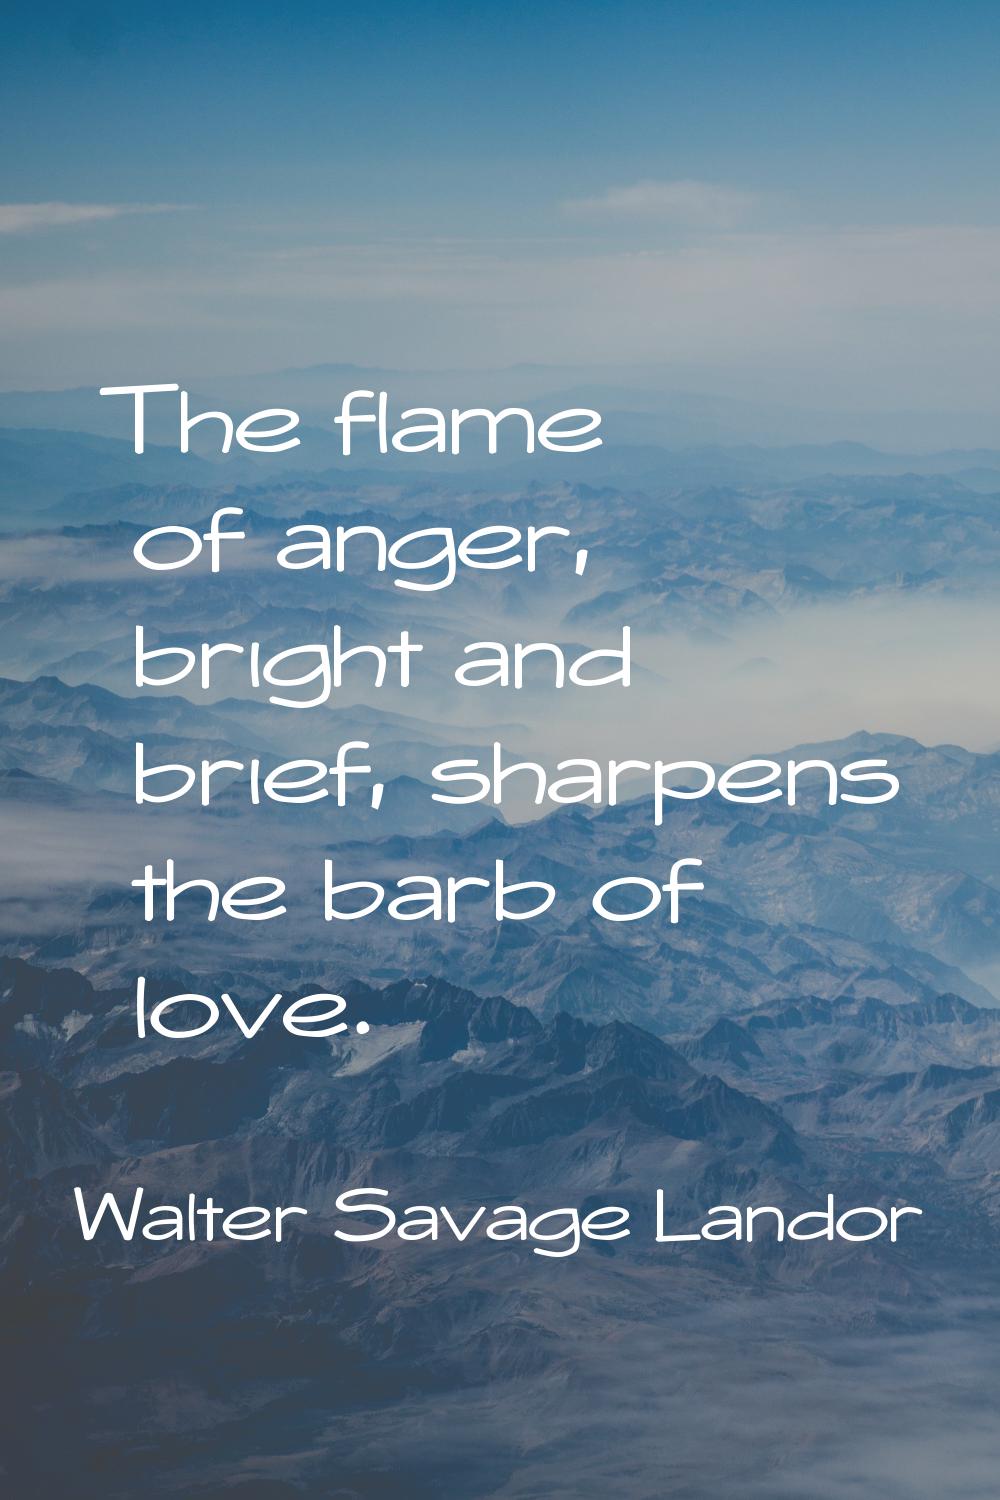 The flame of anger, bright and brief, sharpens the barb of love.